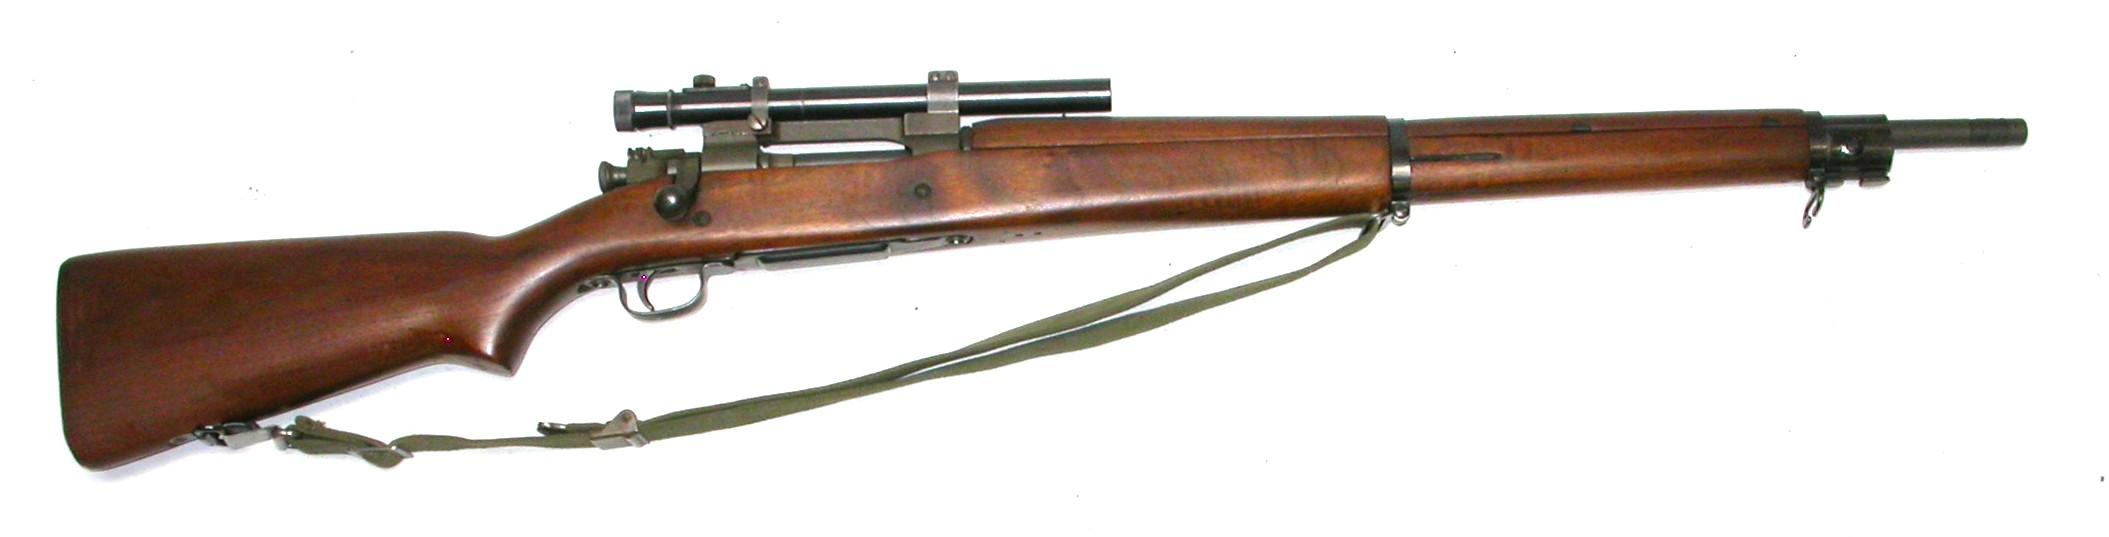 US Military WWII Remington M1903/A4 30-06 Bolt-Action Sniper Rifle - FFL # 3407212 (RLR1)